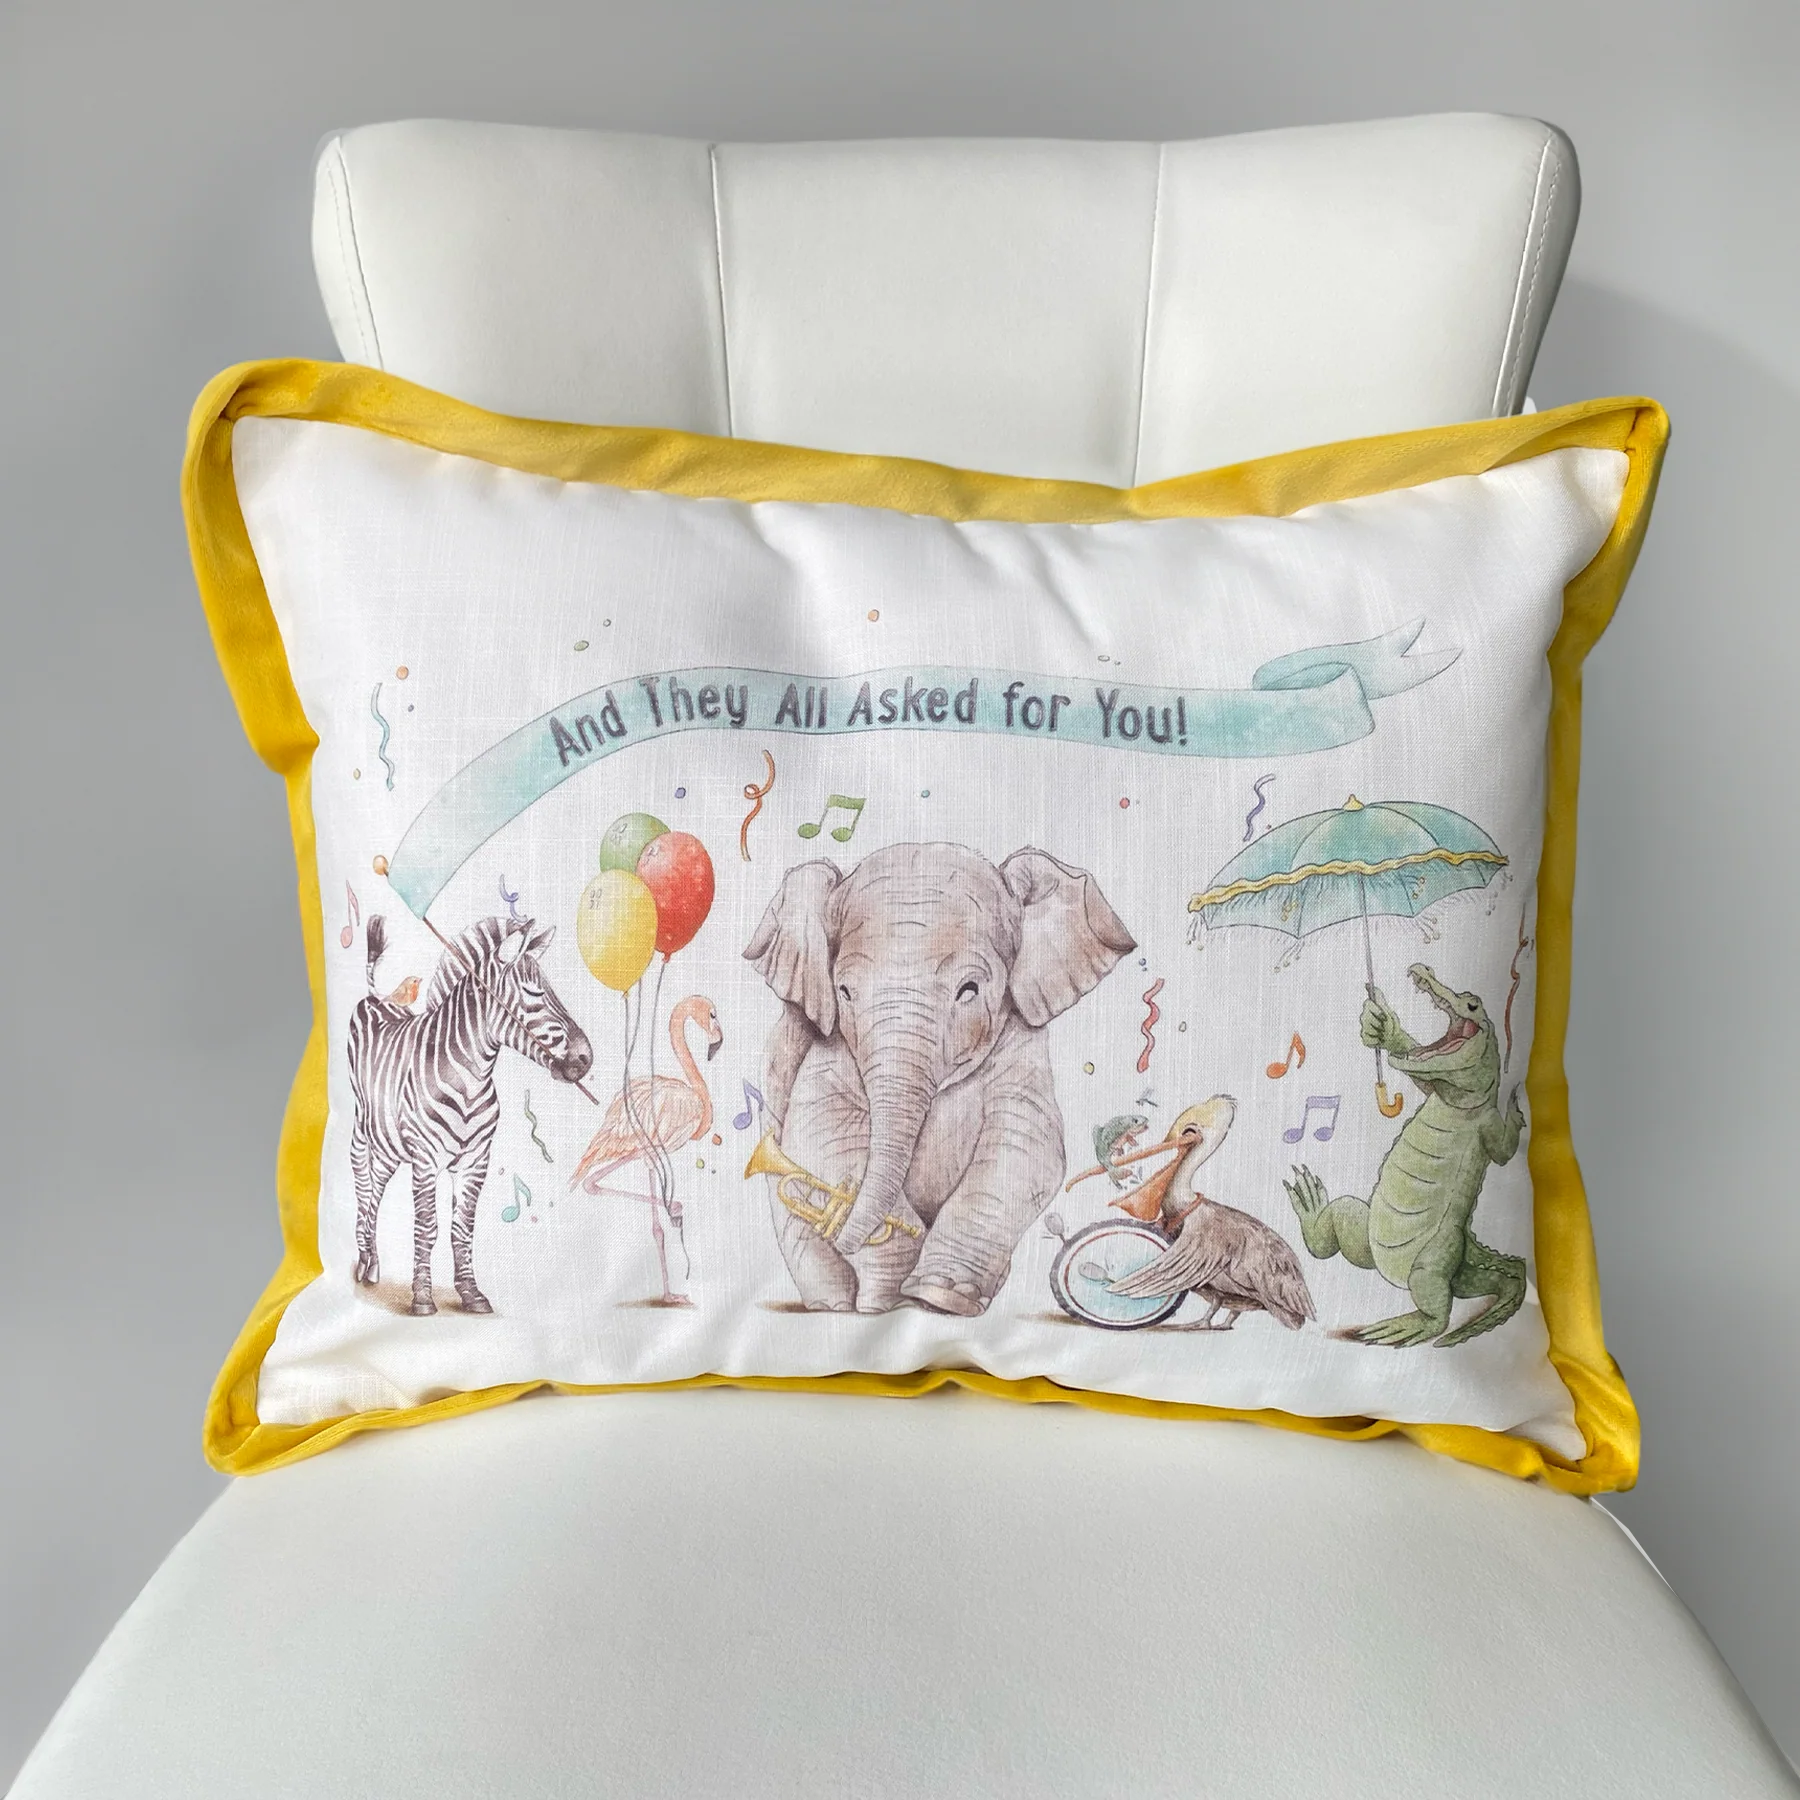 Buy they-all-ask-for-you Printed Pillows